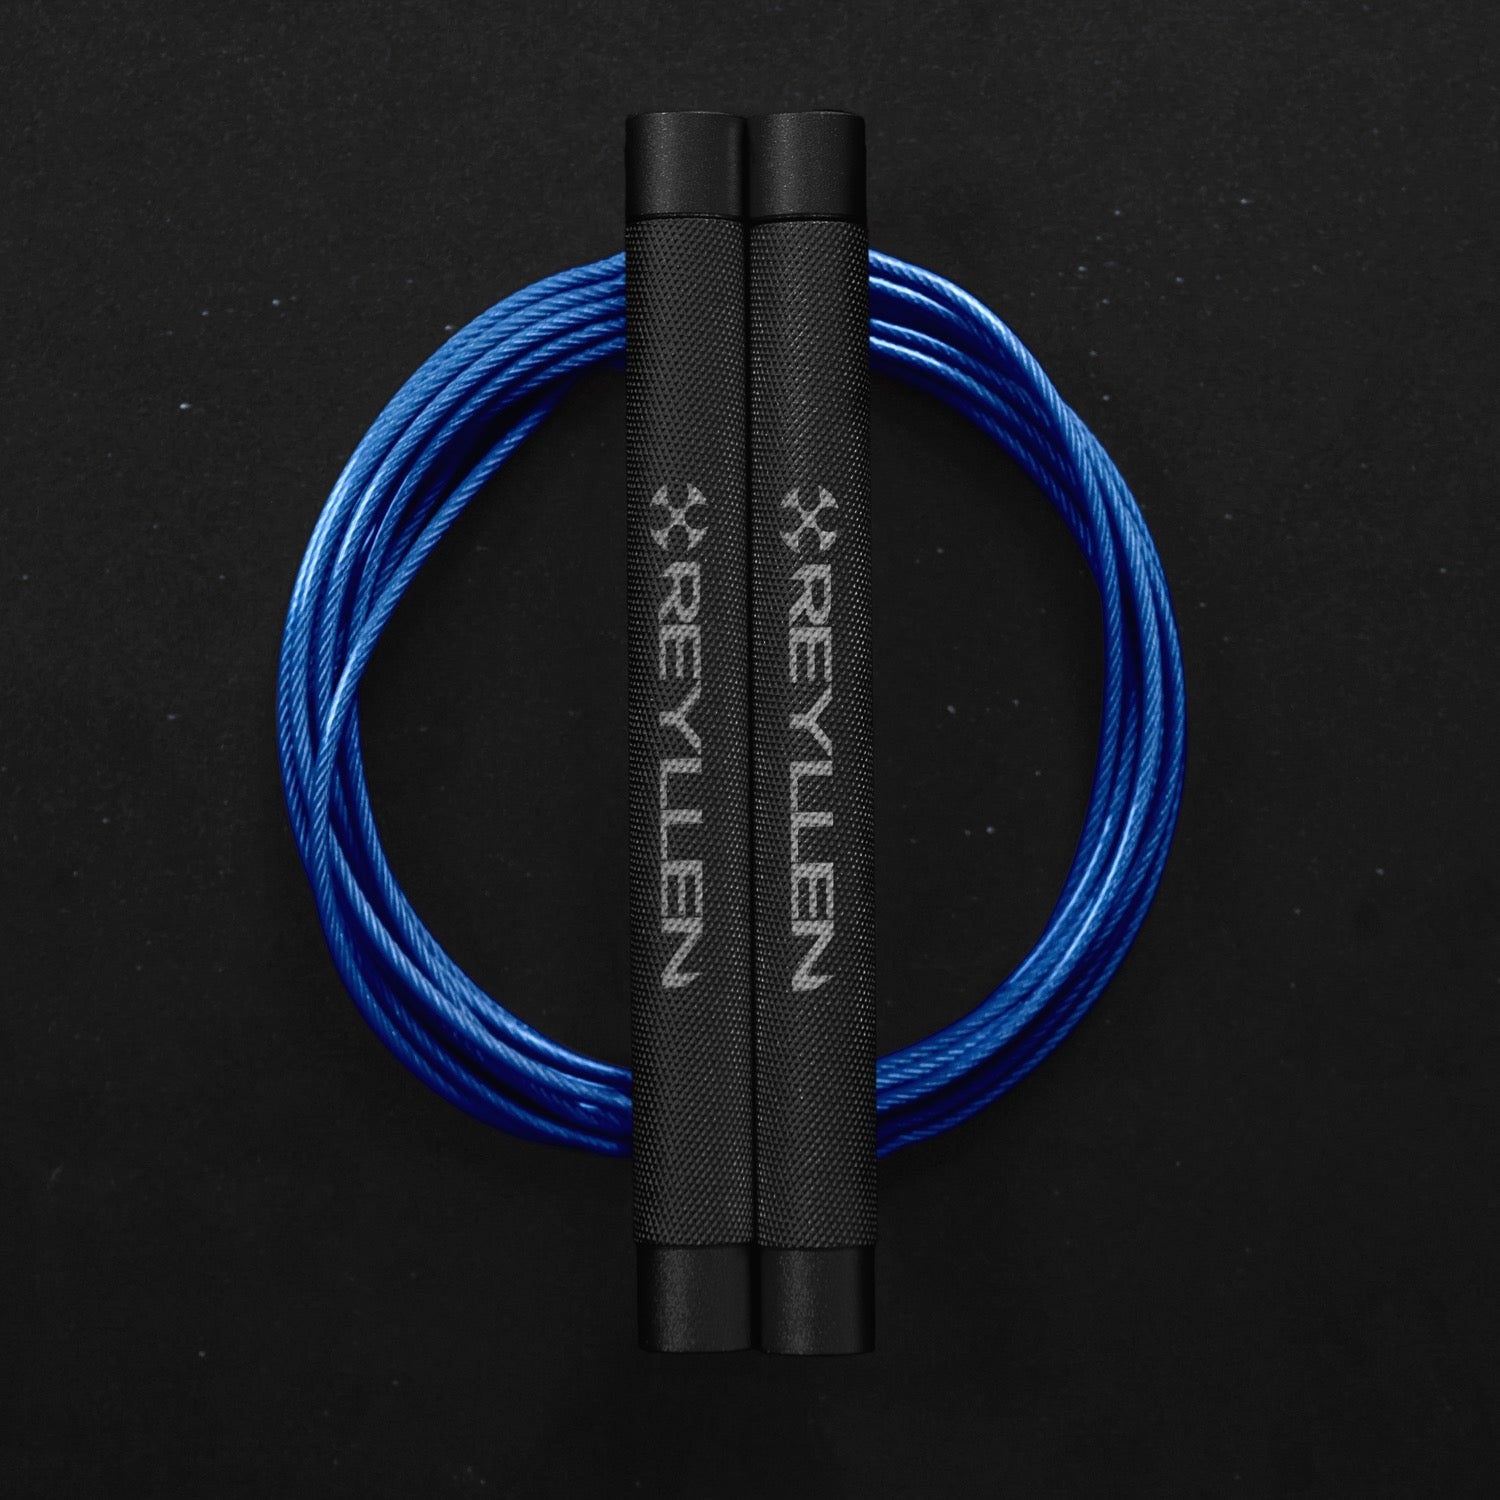 Reyllen Flare Mx Speed Skipping Jump Rope - Aluminium Handles - black with blue pvc cable